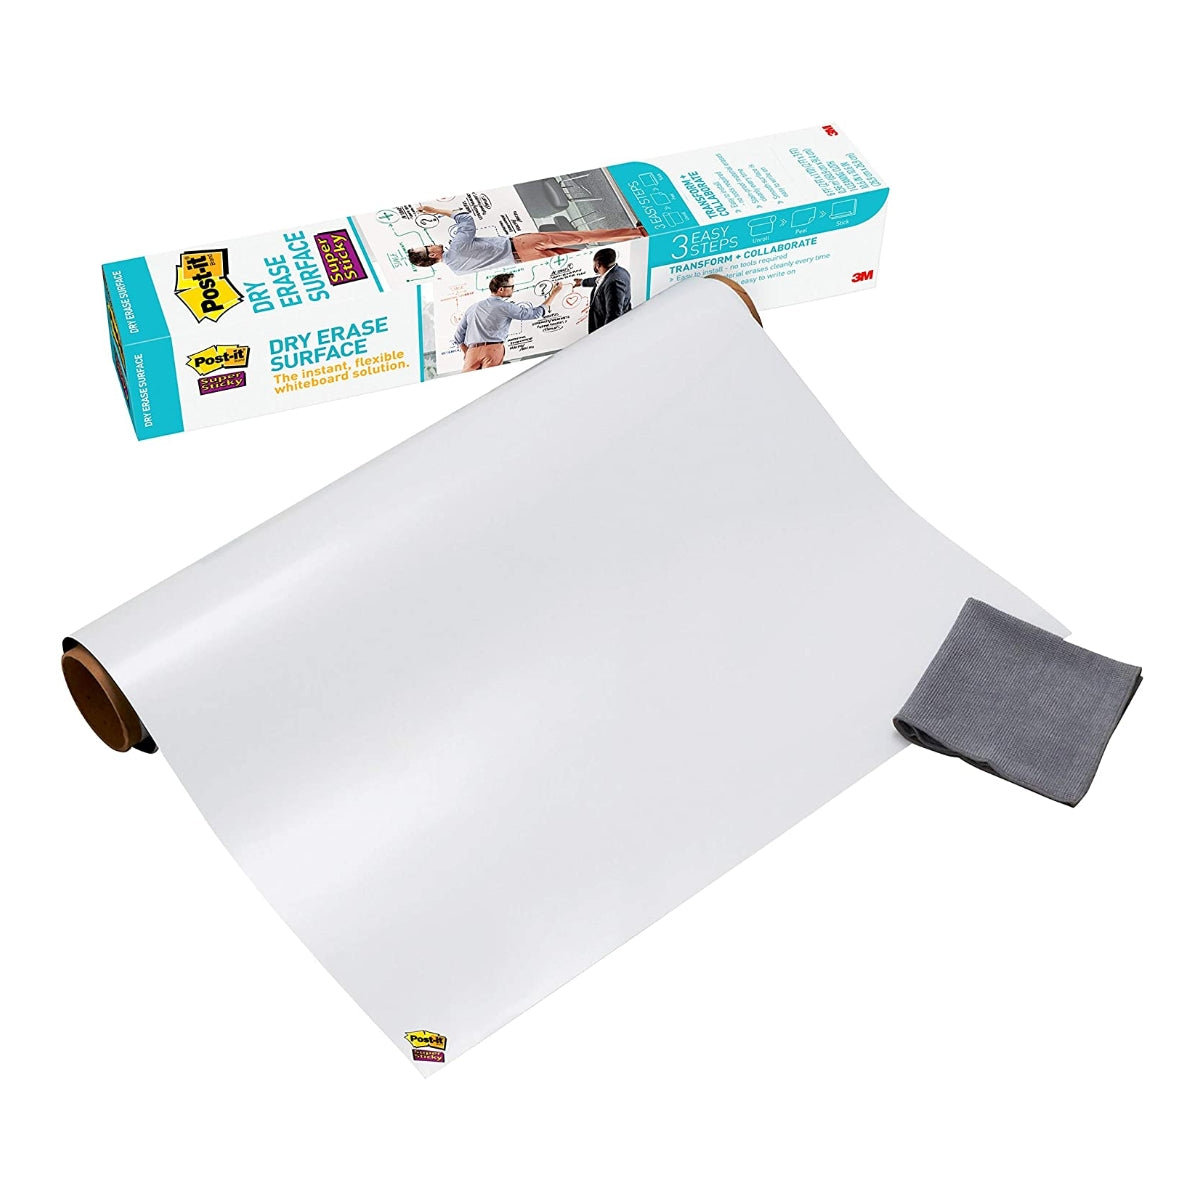 3M Post-it Dry Erase Surface Magic-Chart with cloth, 60x90cm, White